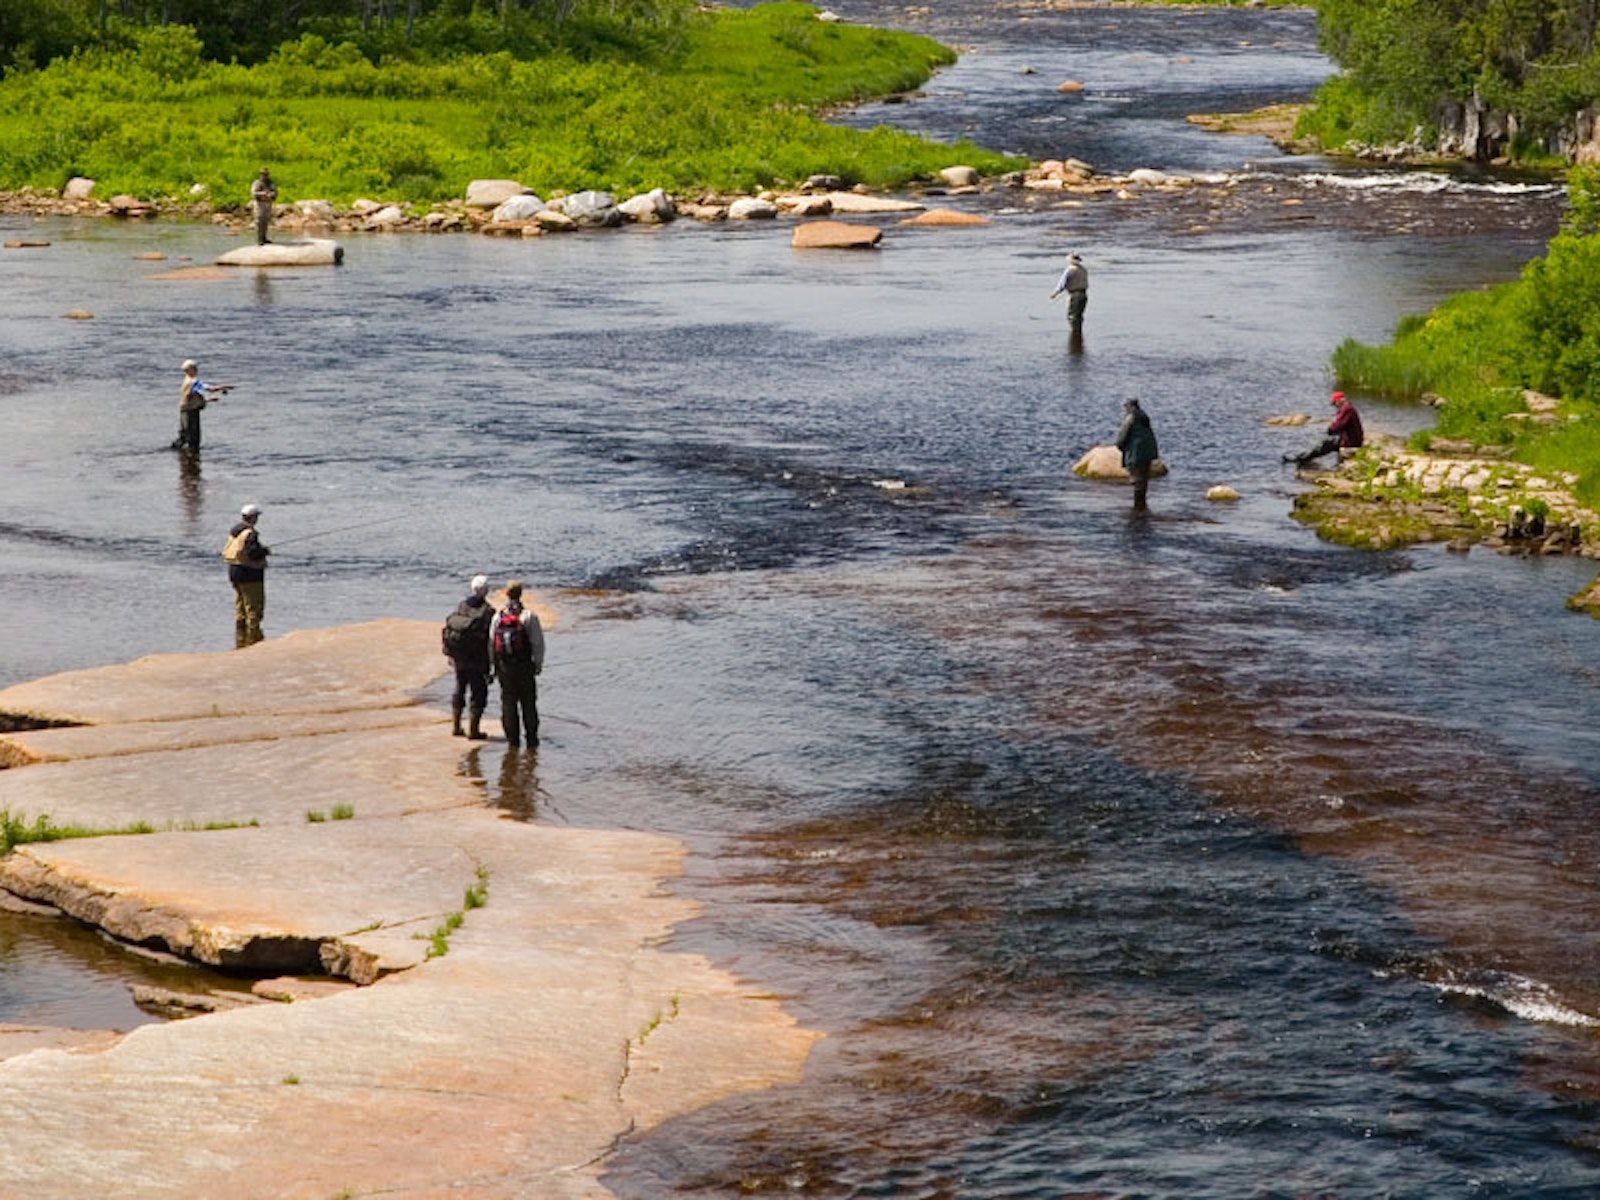 People standing and fishing in a river